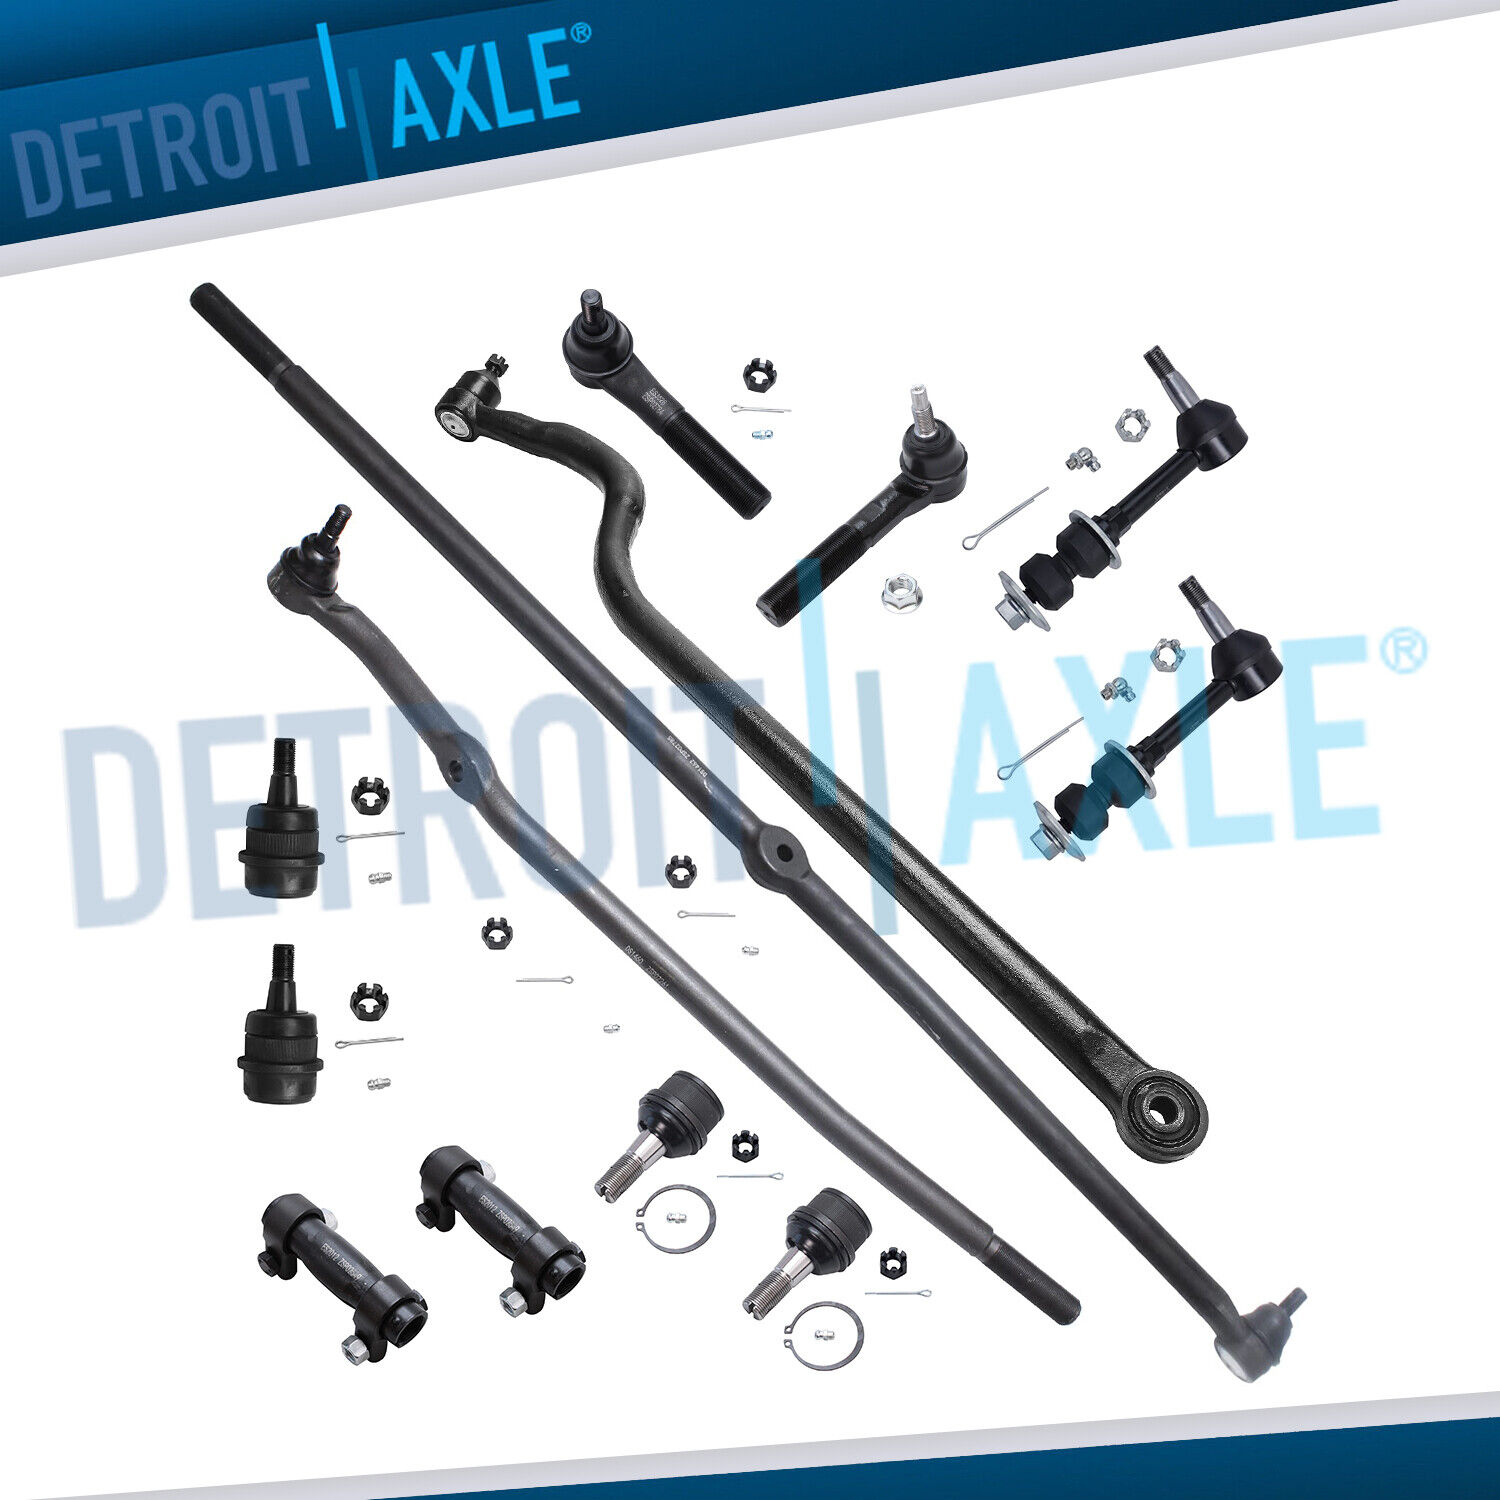 13pc Tie Rod Track Bar Ball Joint Drag Link Kit for 2000 2001 Dodge Ram 1500 4x4